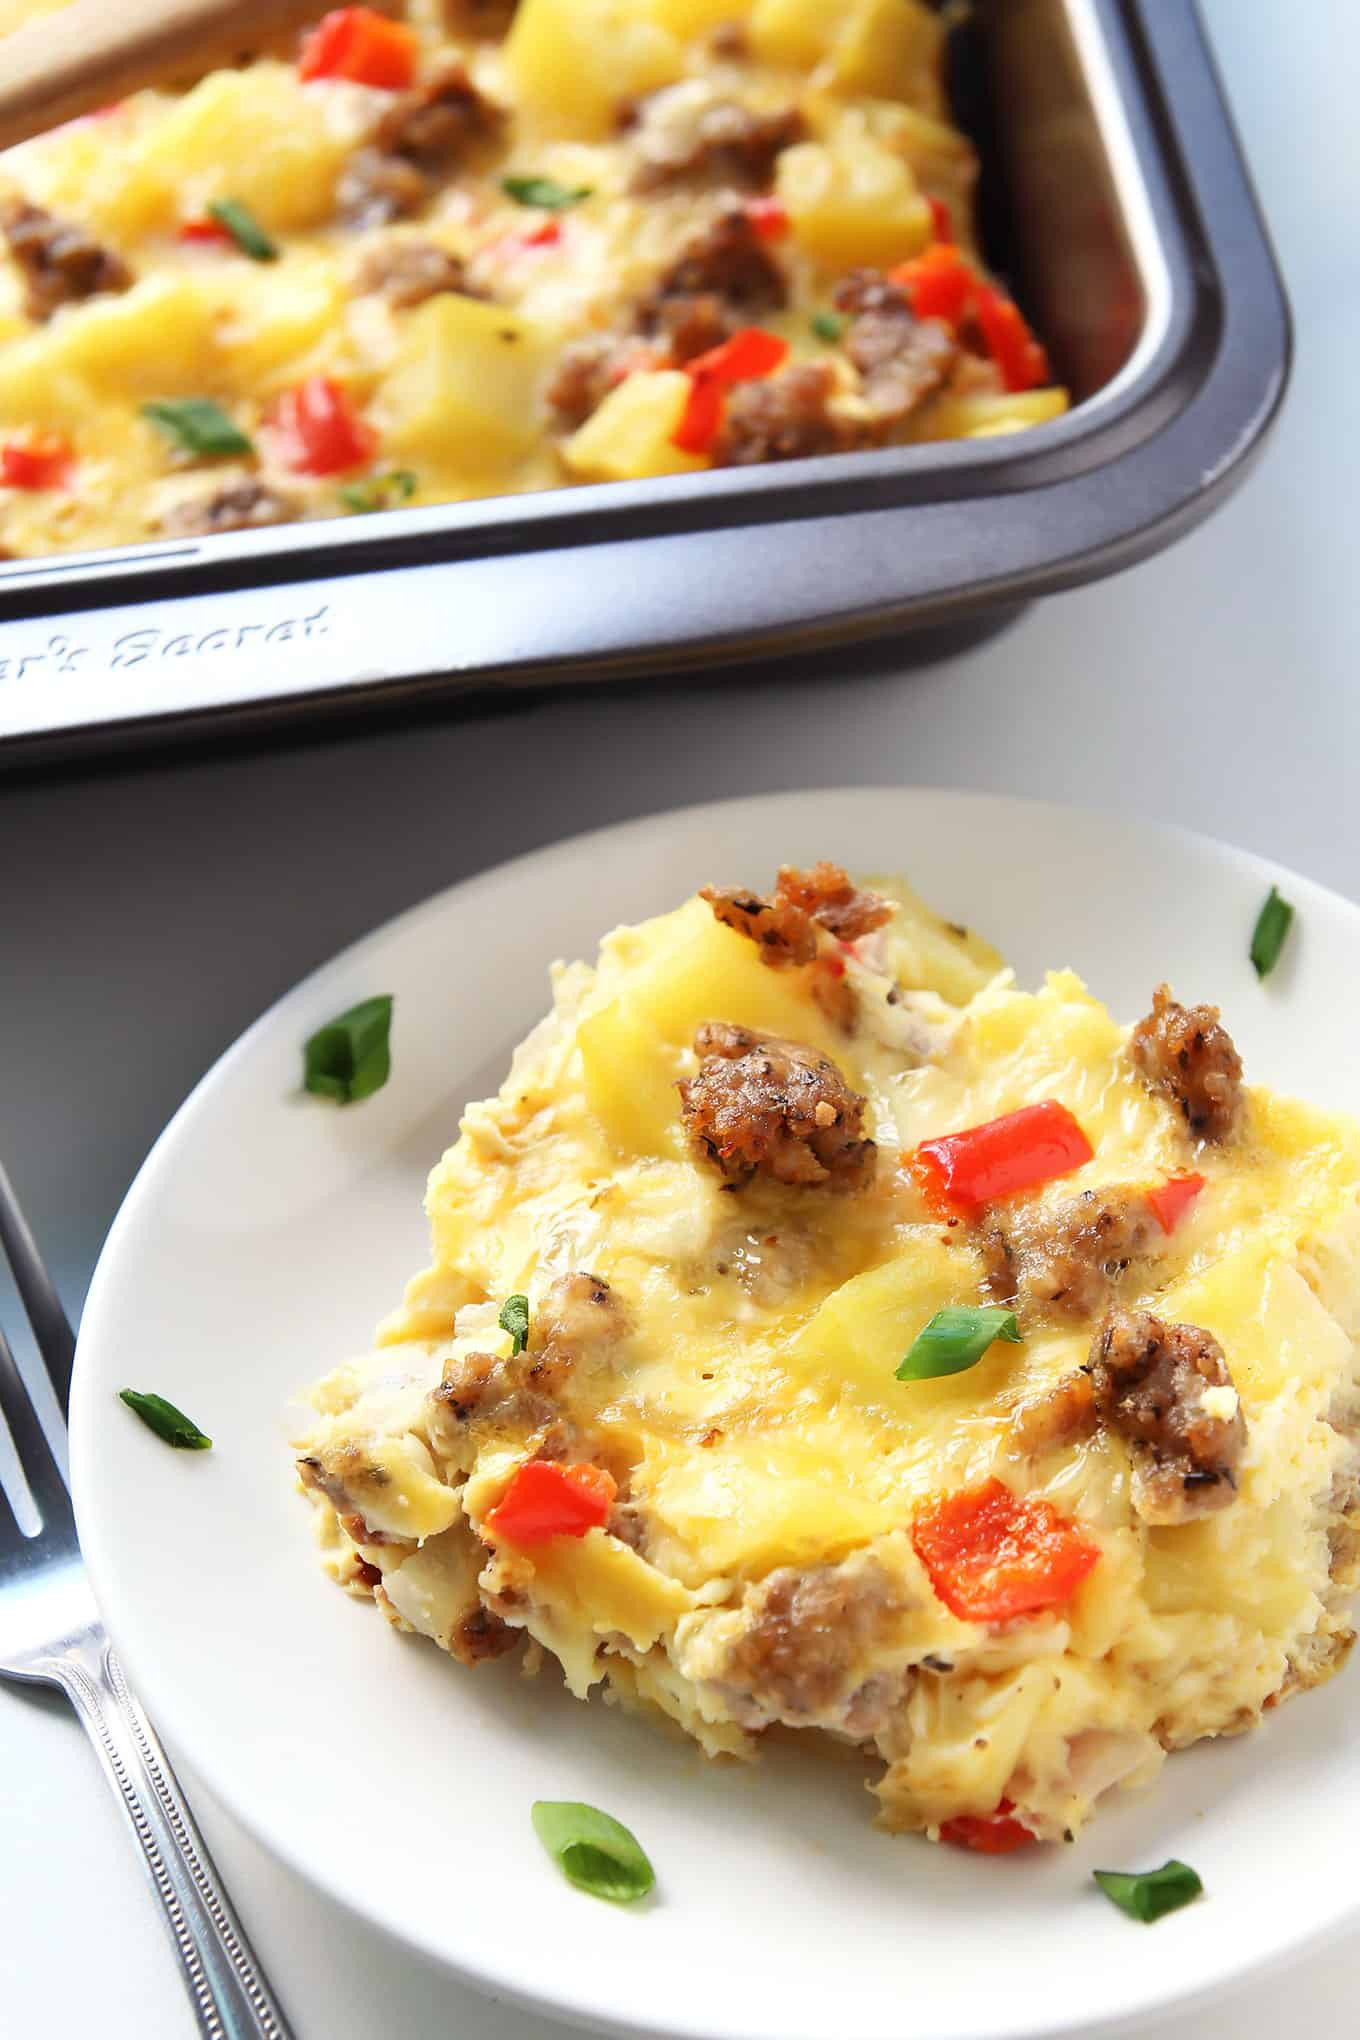 Easy Breakfast Recipes With Eggs
 Breakfast Casserole with Eggs Potatoes and Sausage